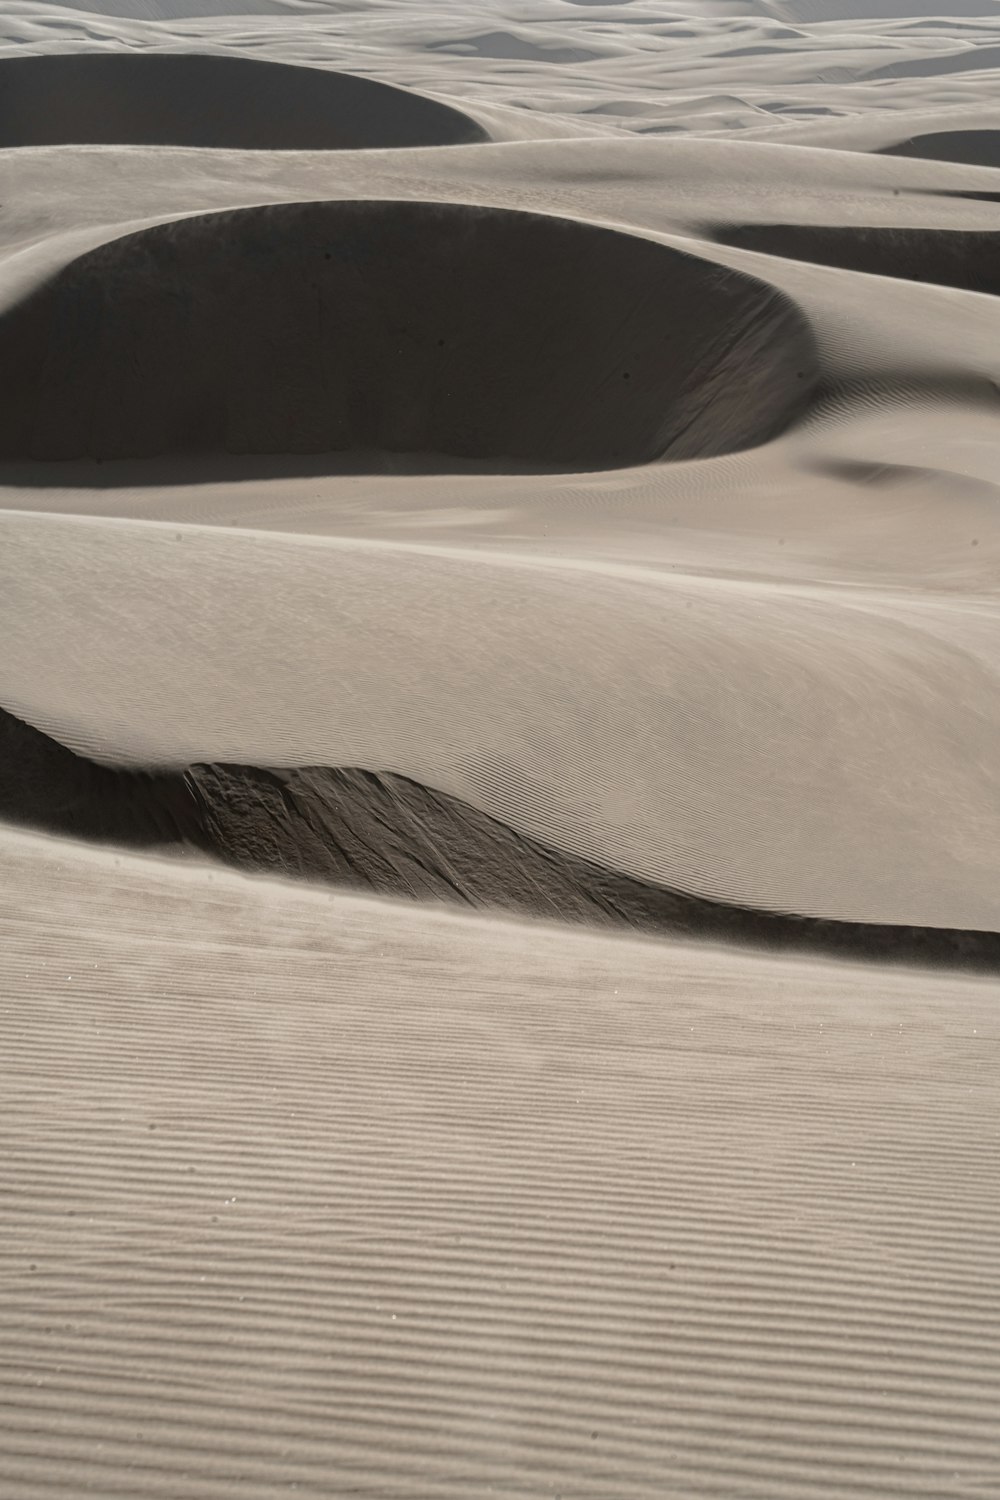 a desert with sand dunes